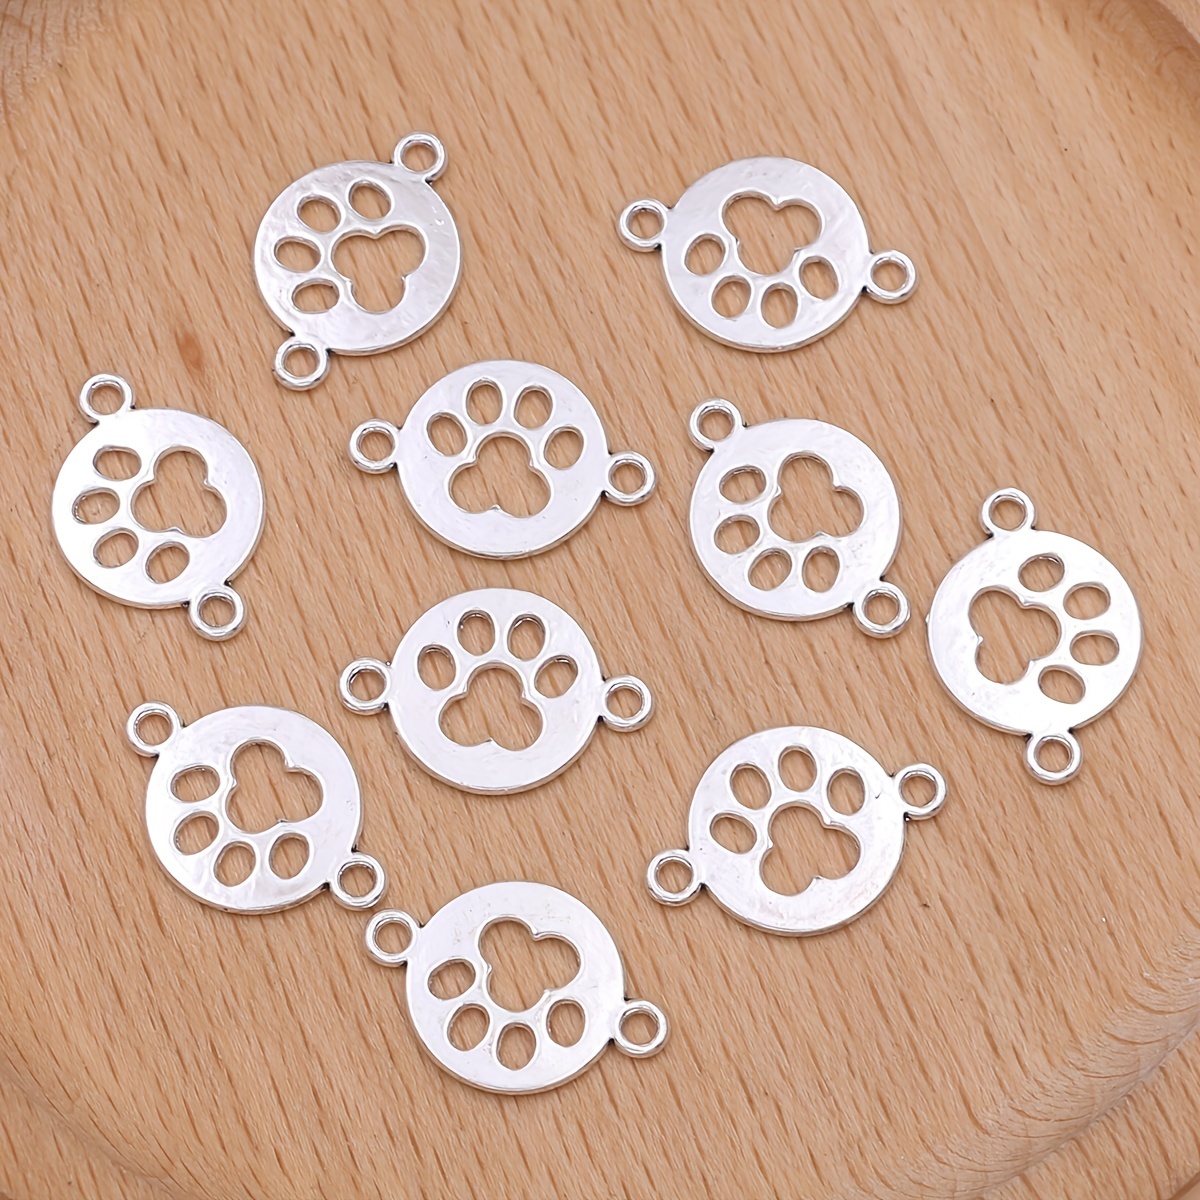 

10pcs Silver Plated Footprints Charms Bear Claw Dog Paw Round Connectors Pendants Links For Jewelry Making Handmade Bracelet Necklace Accessories